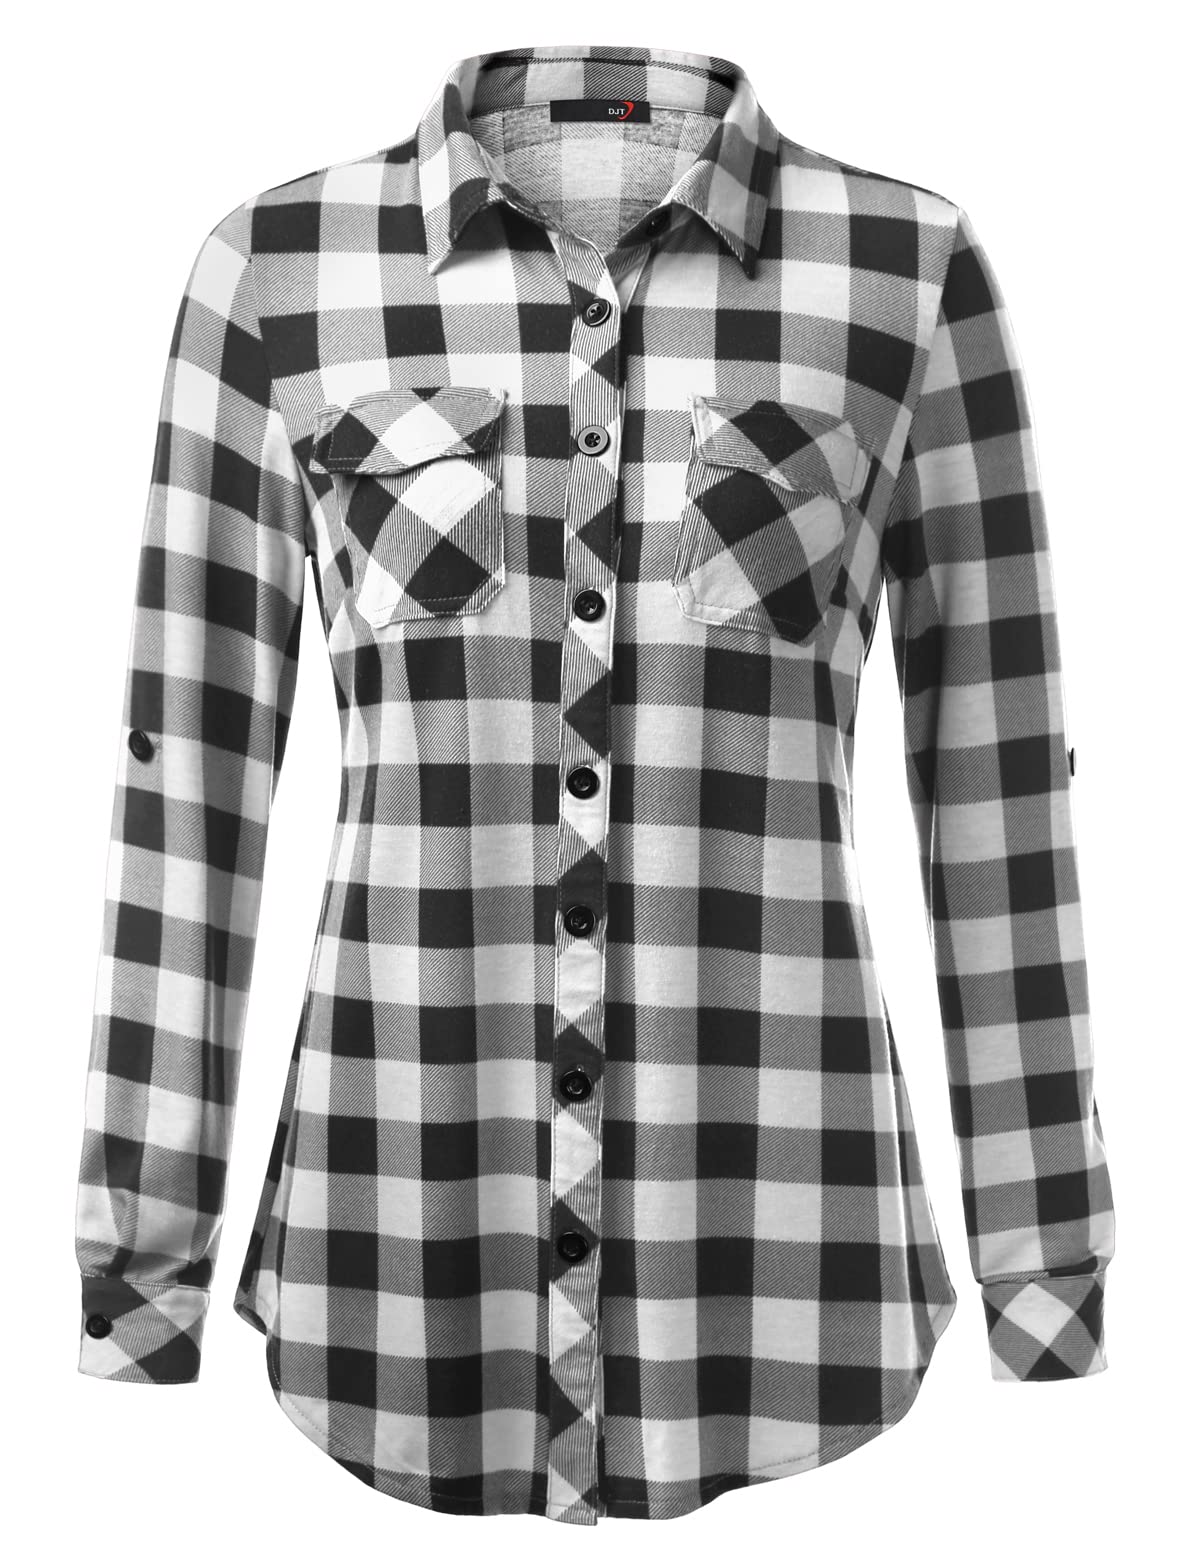 DJT Roll Up Long Sleeve Black white Women’s Collared Button Down Plaid Shirt